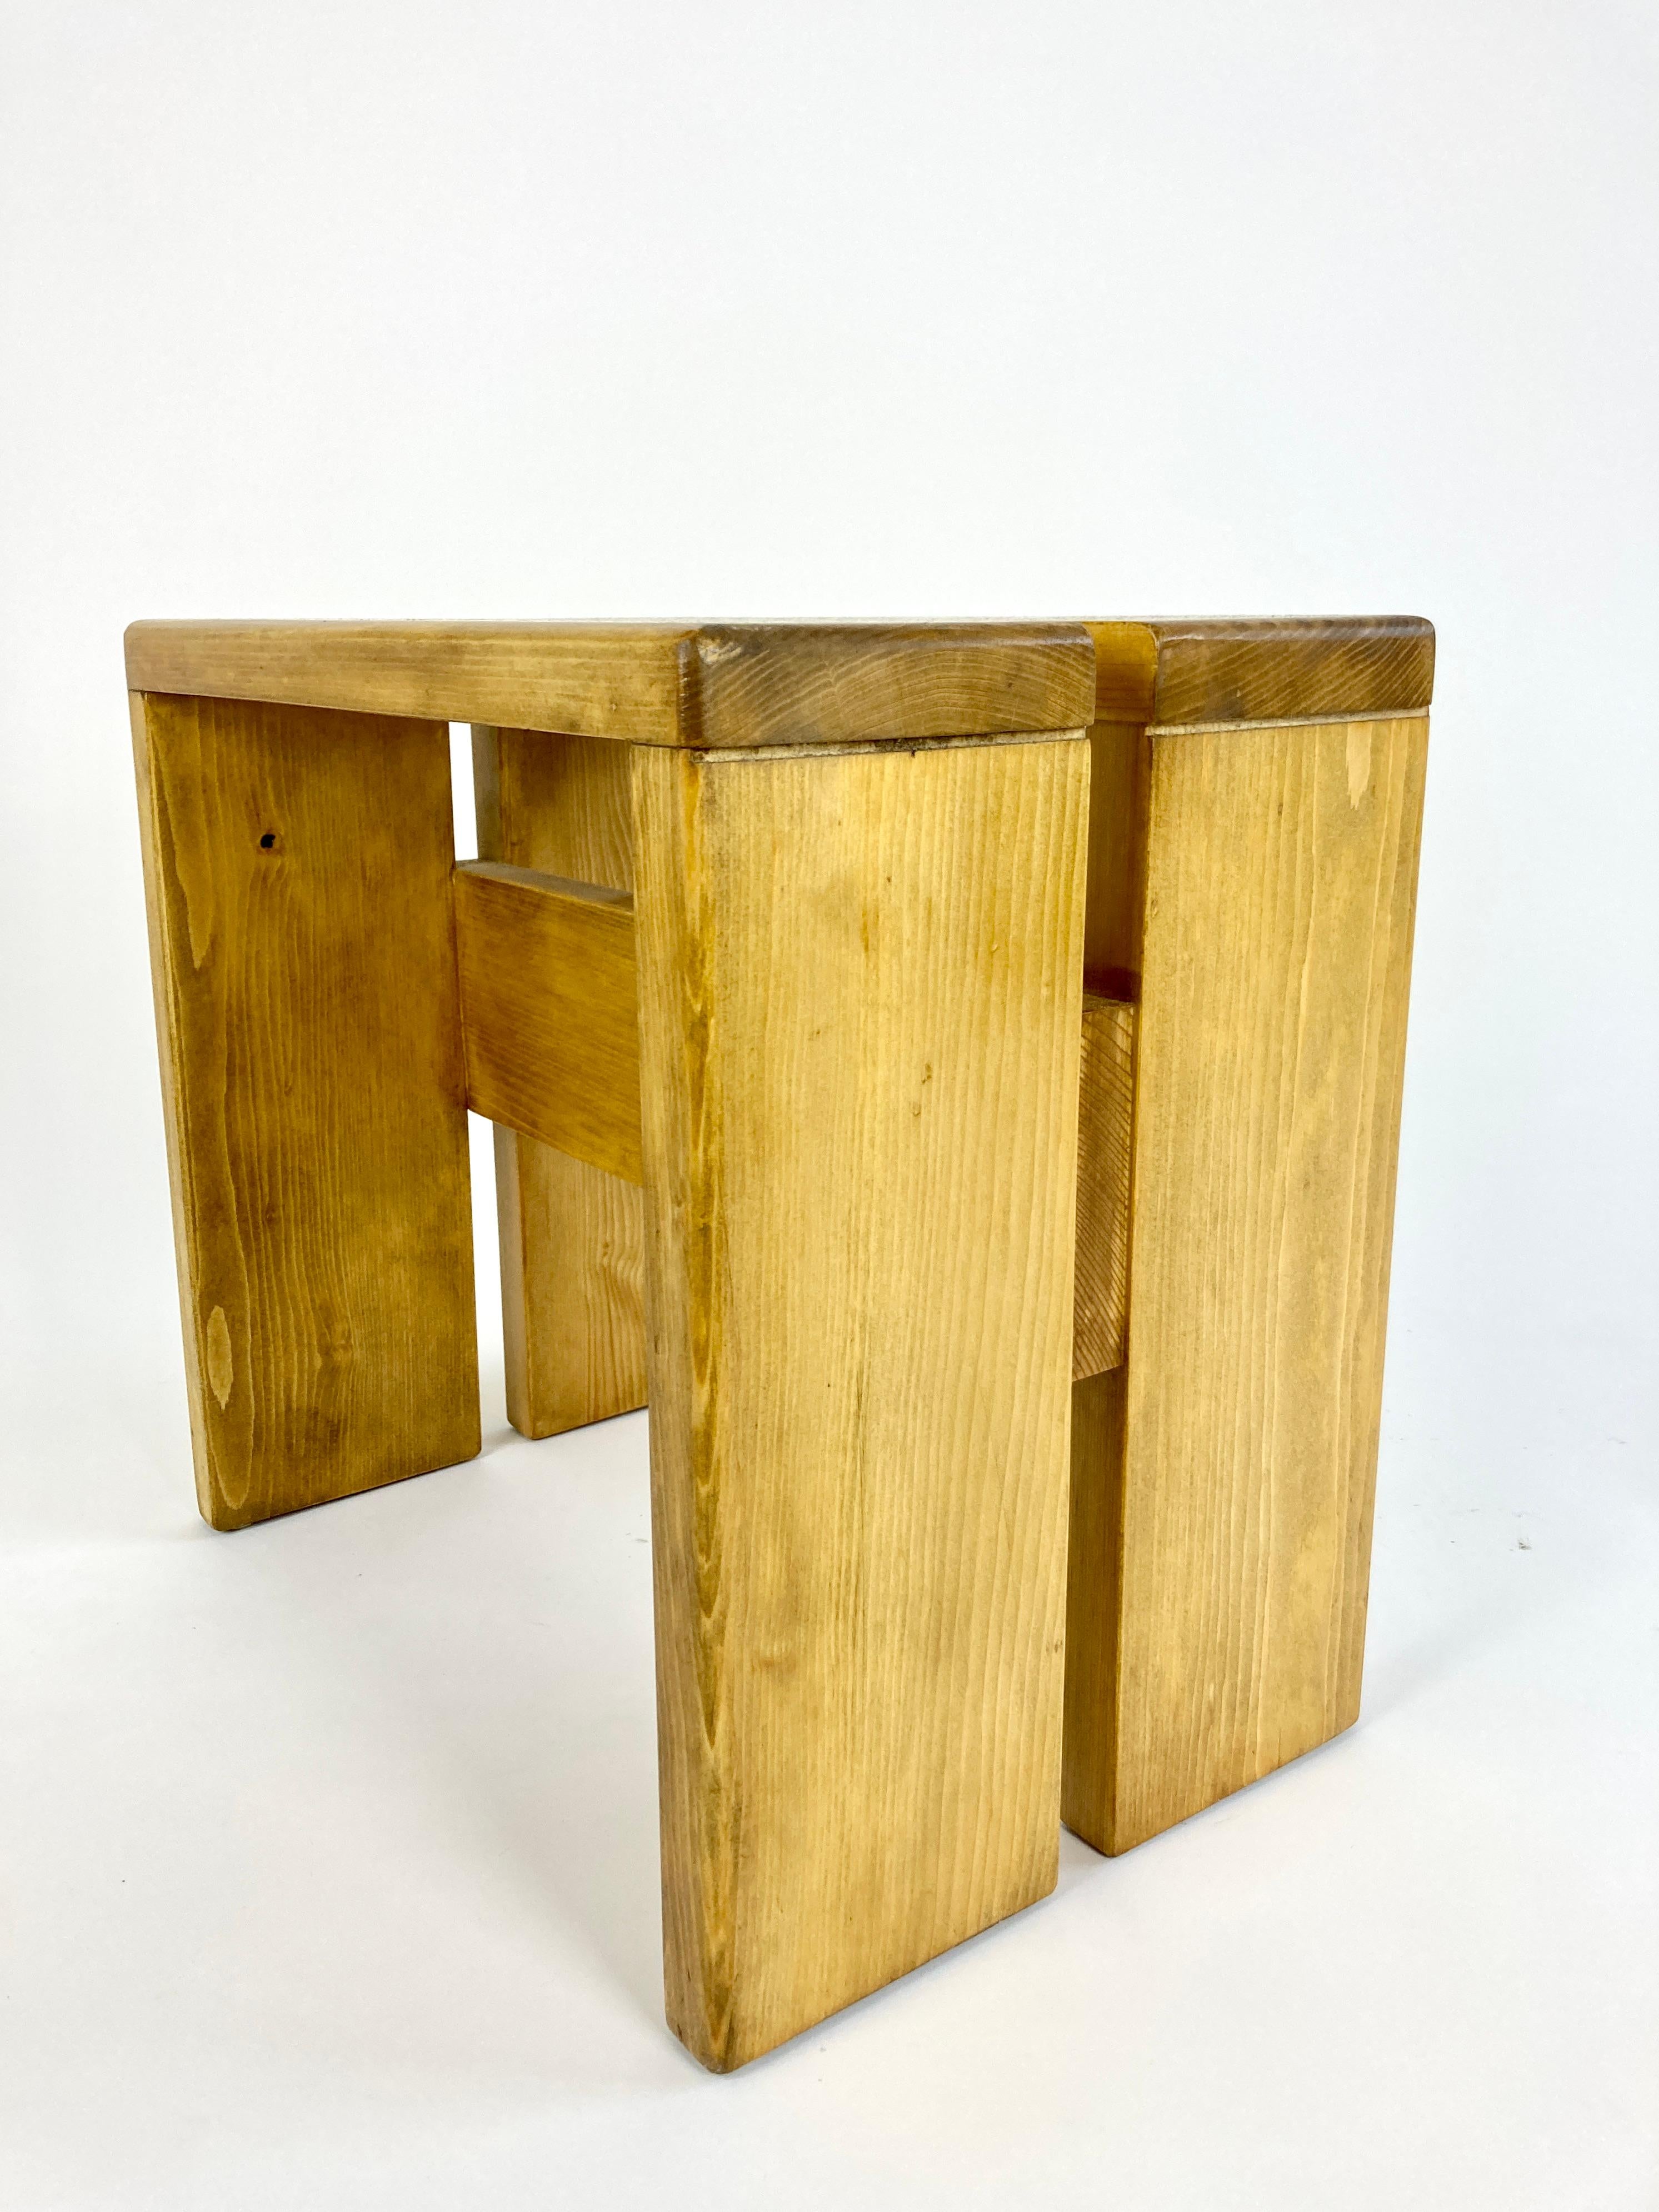 Stool / Side Table / Small Bench from Les Arcs, France. Charlotte Perriand 3